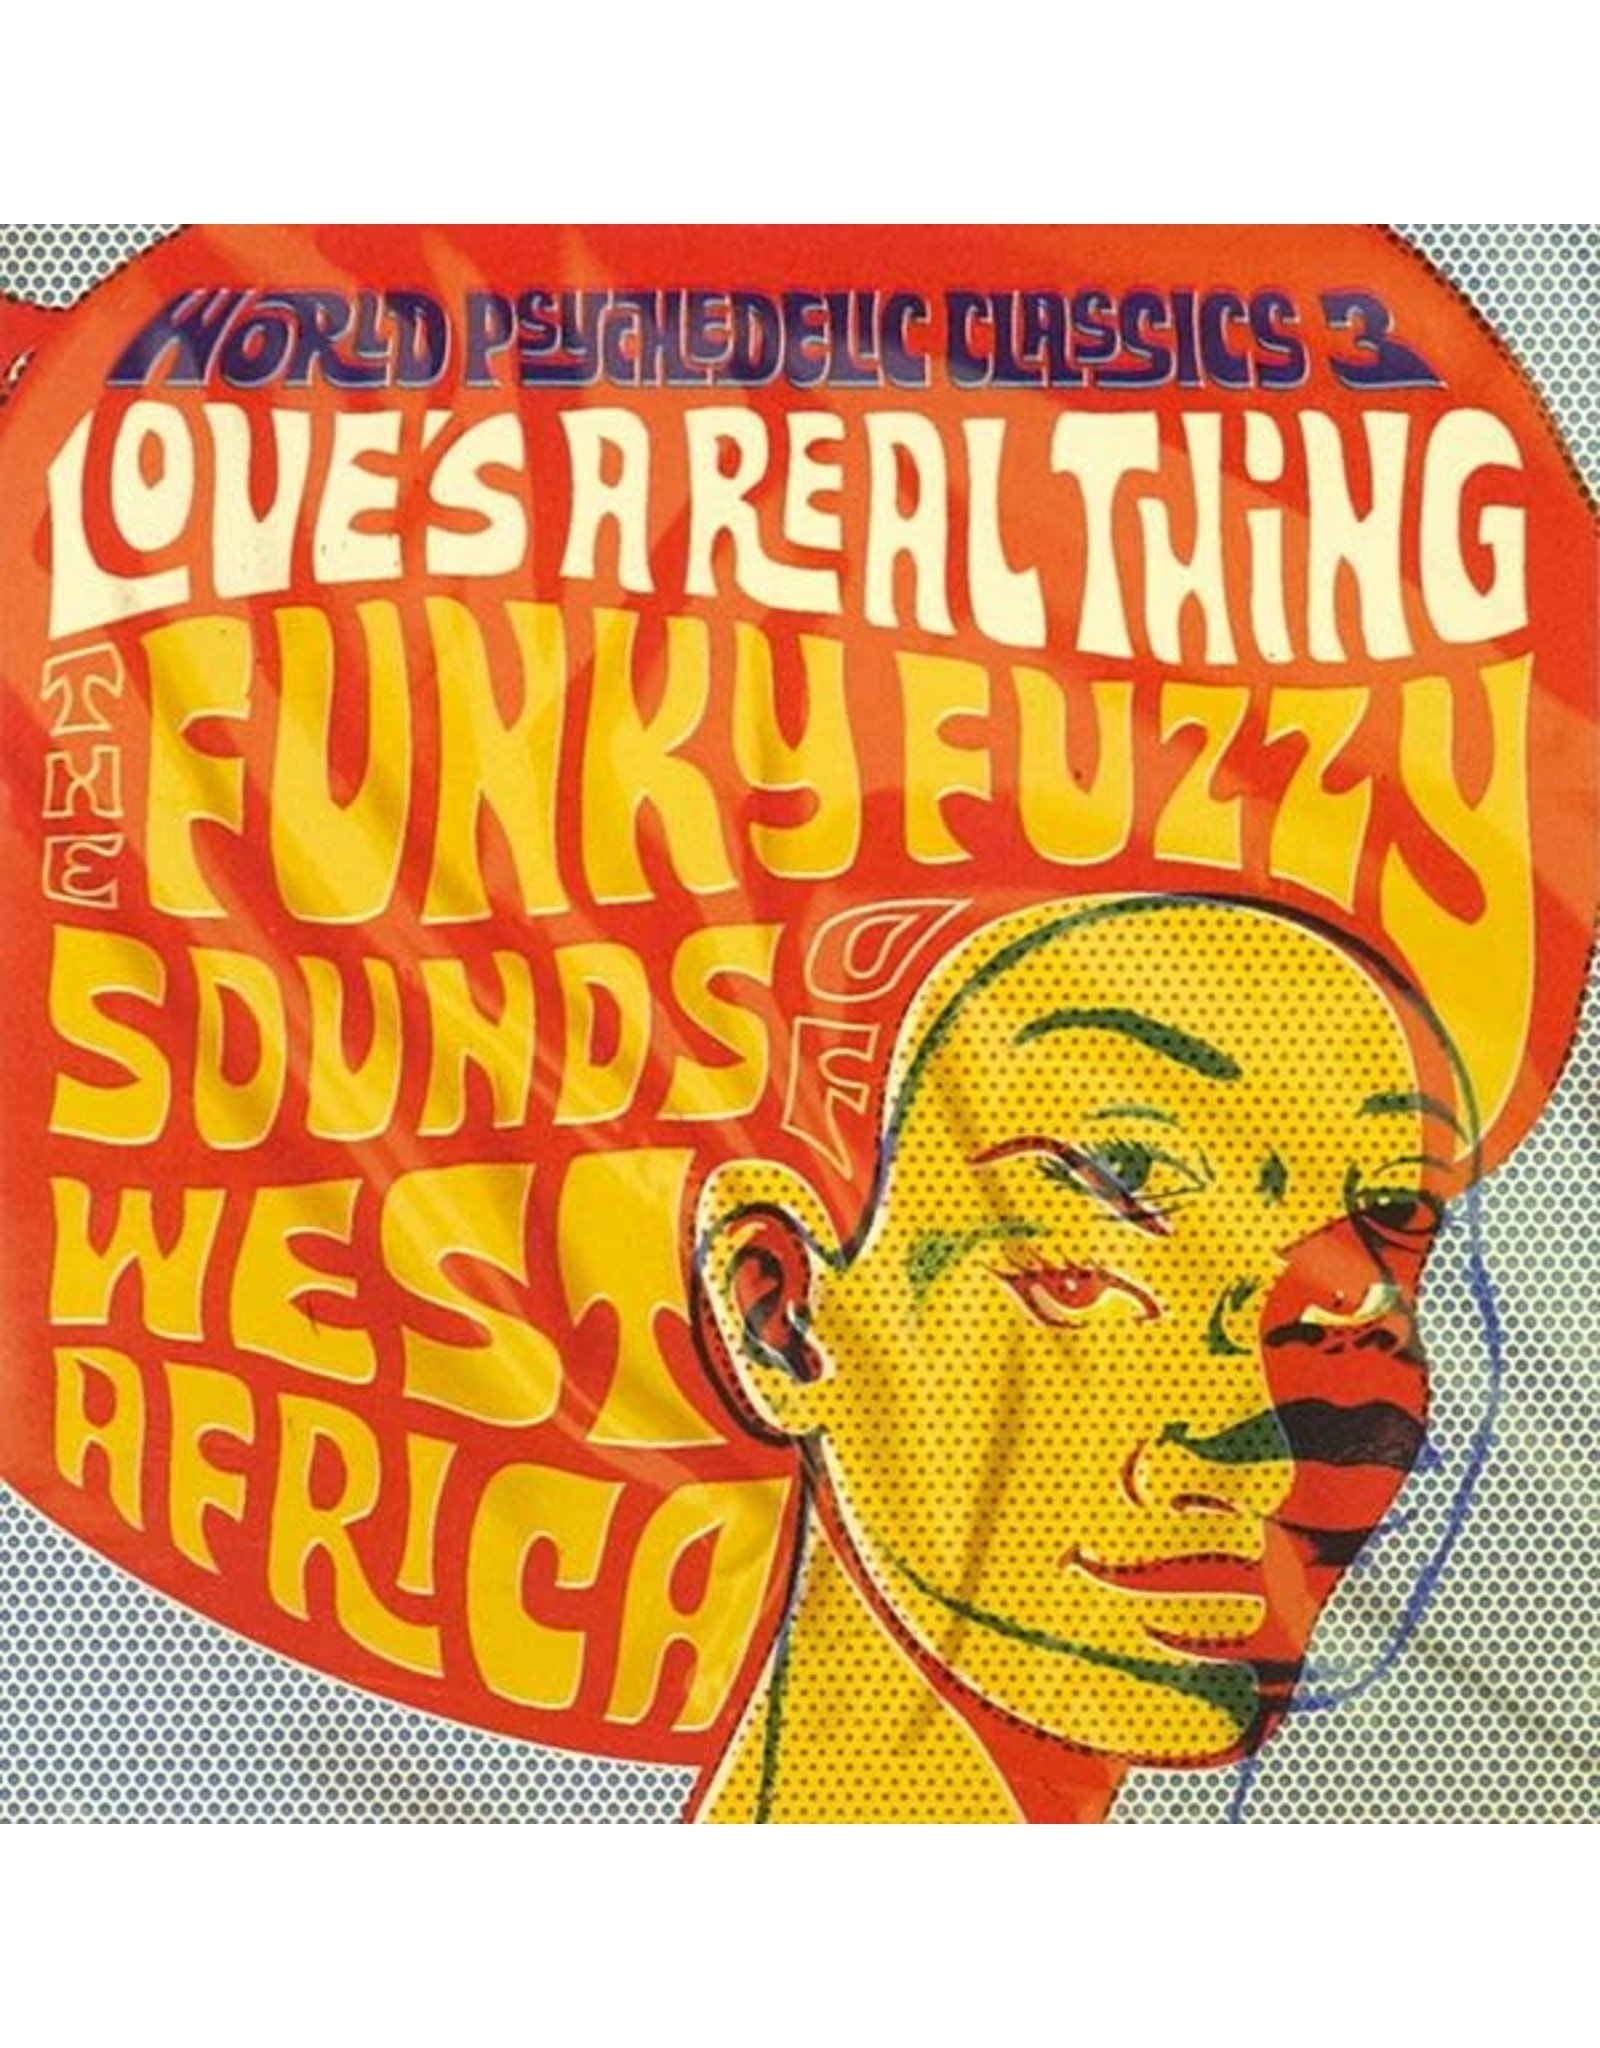 Stones Throw Various: World Psychedelic Classics 3: Love's a Real Thing - The Funky Fuzzy Sounds of West Africa LP